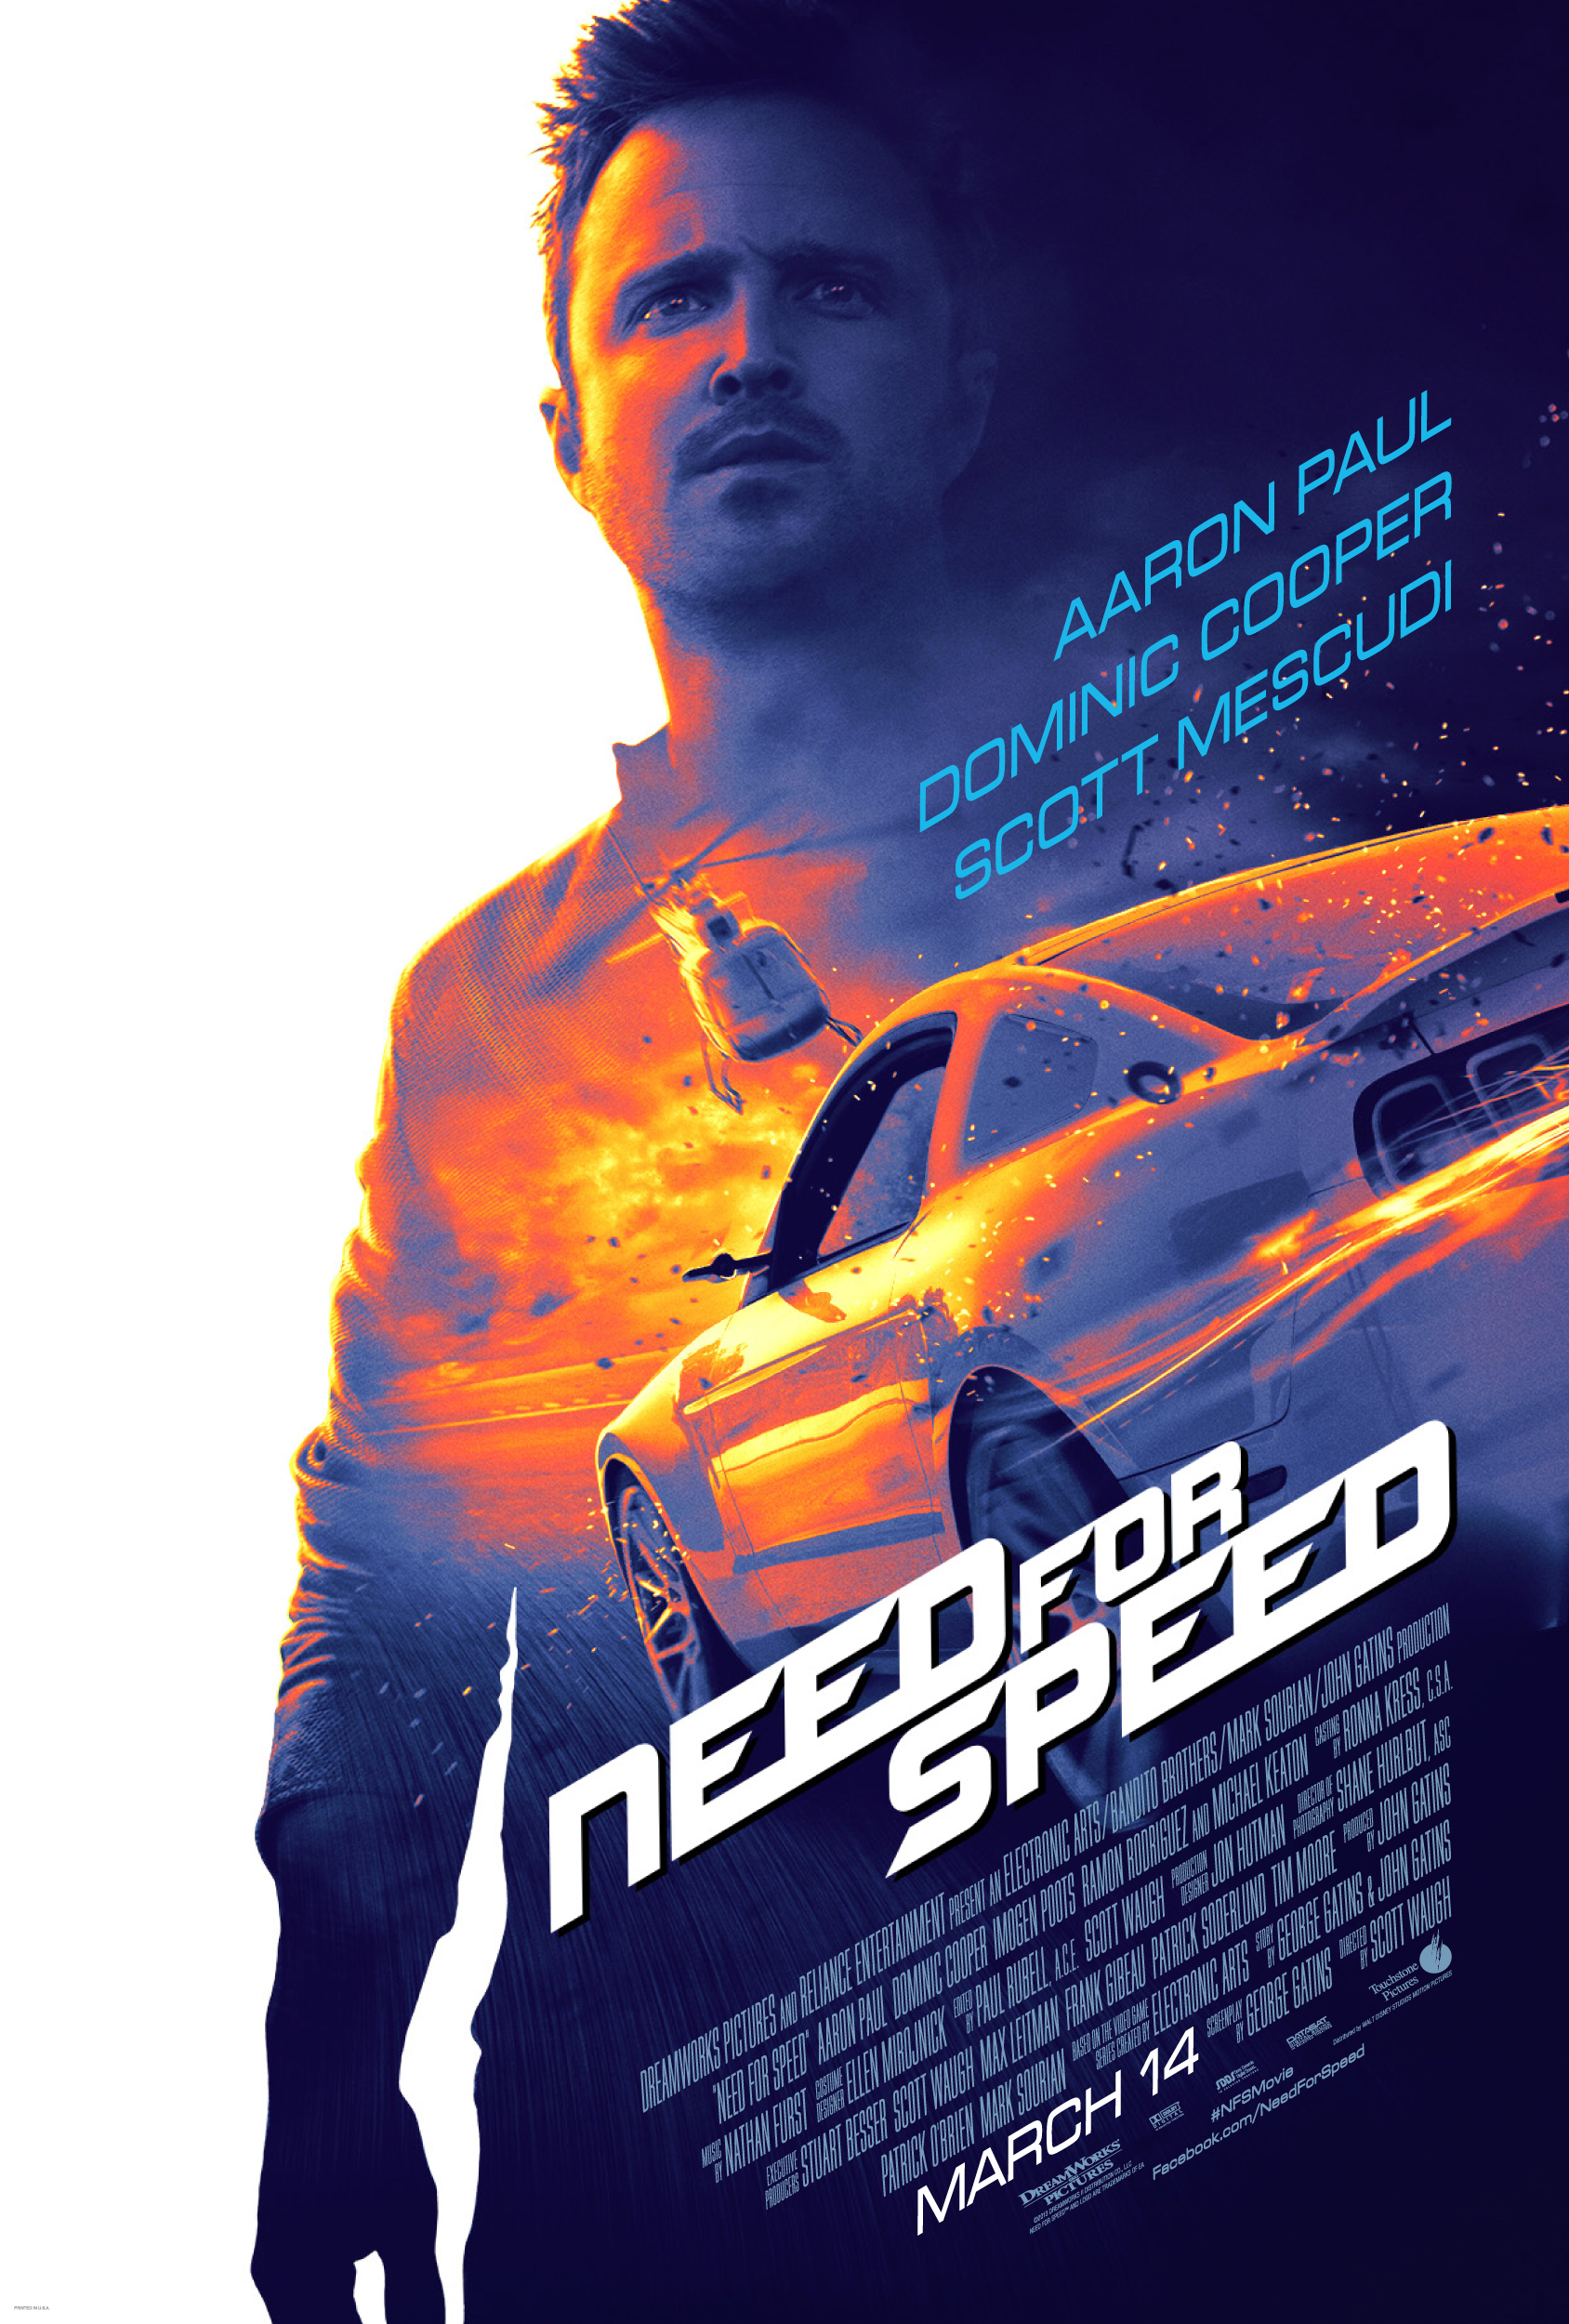 Need for Speed film - Wikipedia